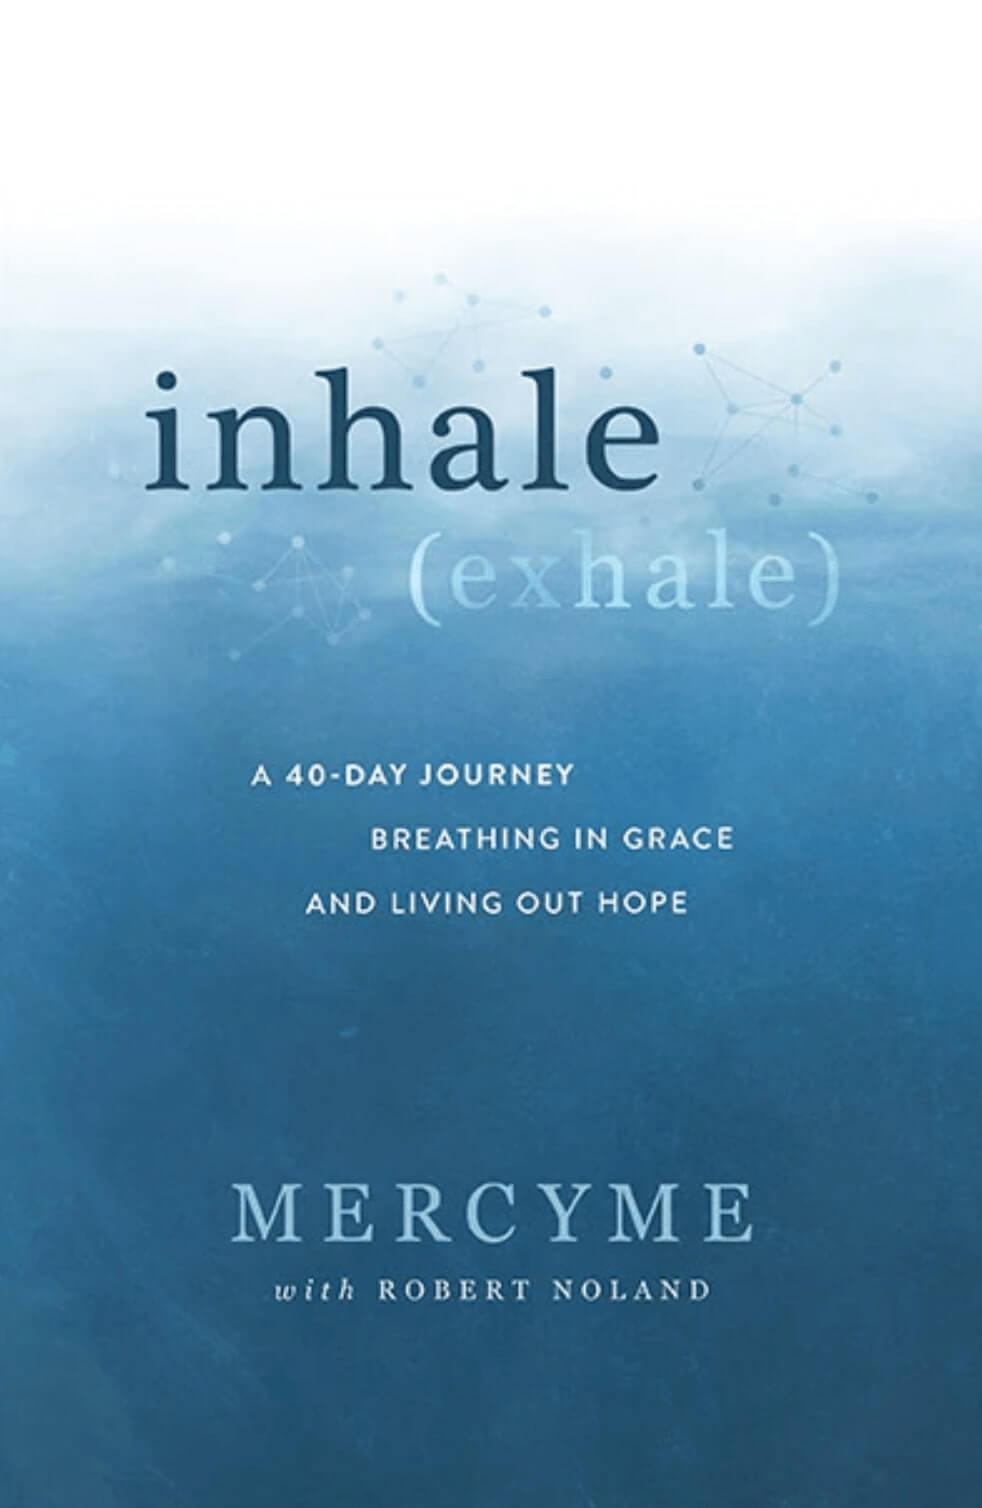 Cover of the book "inhale (exhale): A 40-Day Journey Breathing in Grace and Living Out Hope"